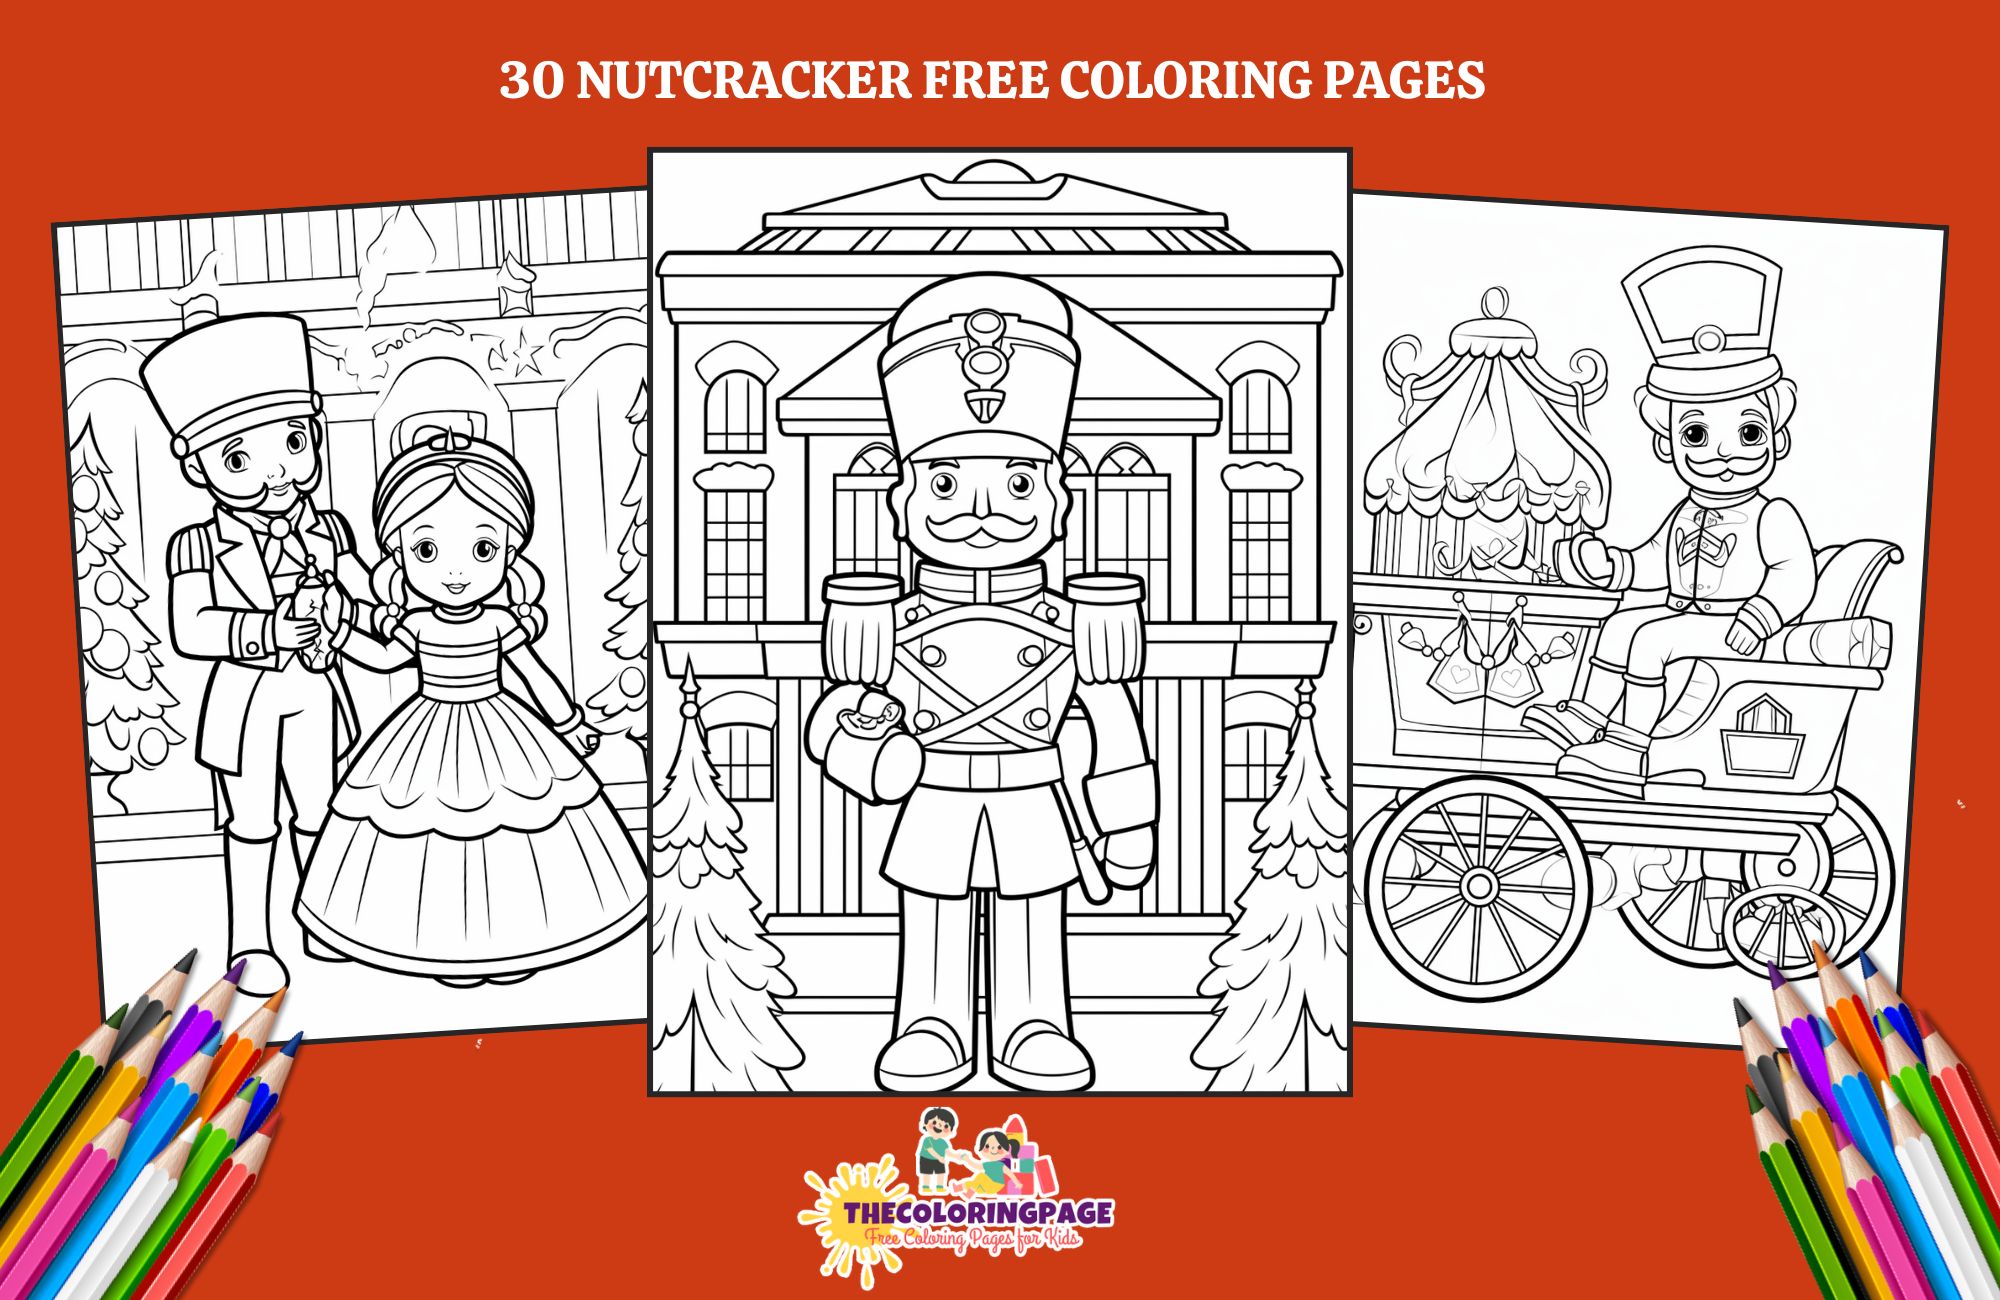 30 Free Nutcracker Coloring Pages for kids